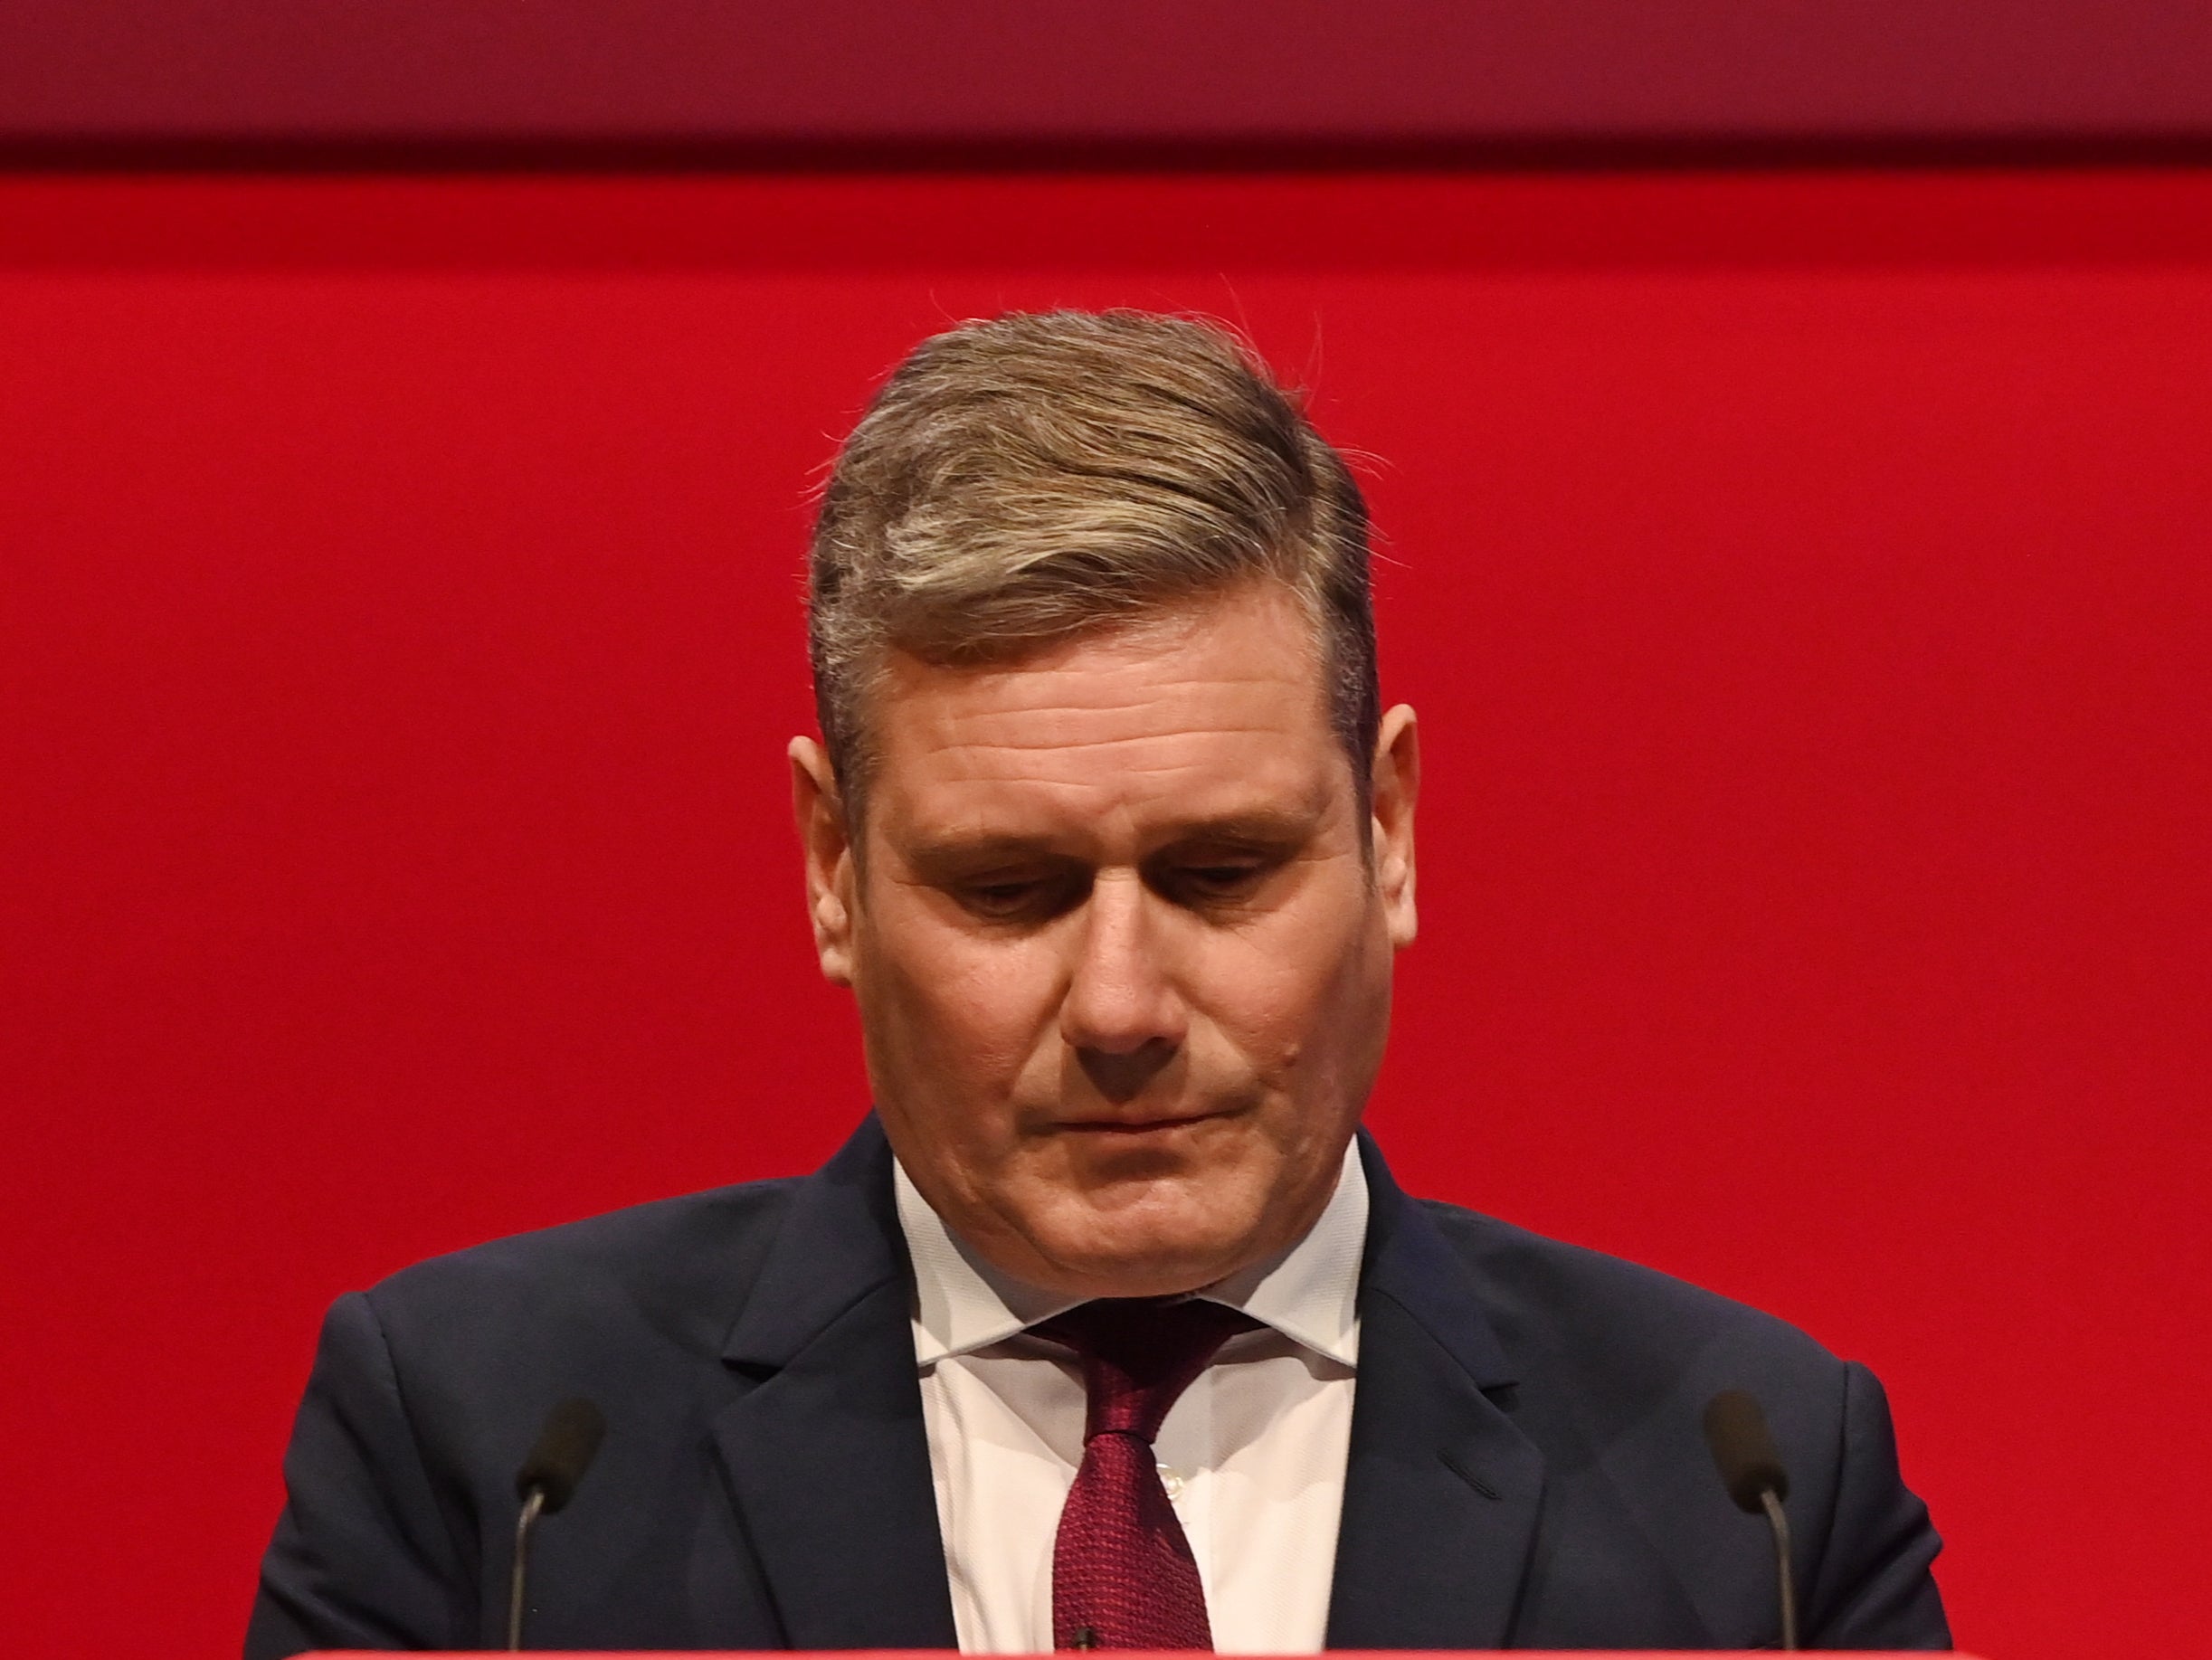 The latest move threatens to deepen the divide between Unite and Labour leader Sir Keir Starmer